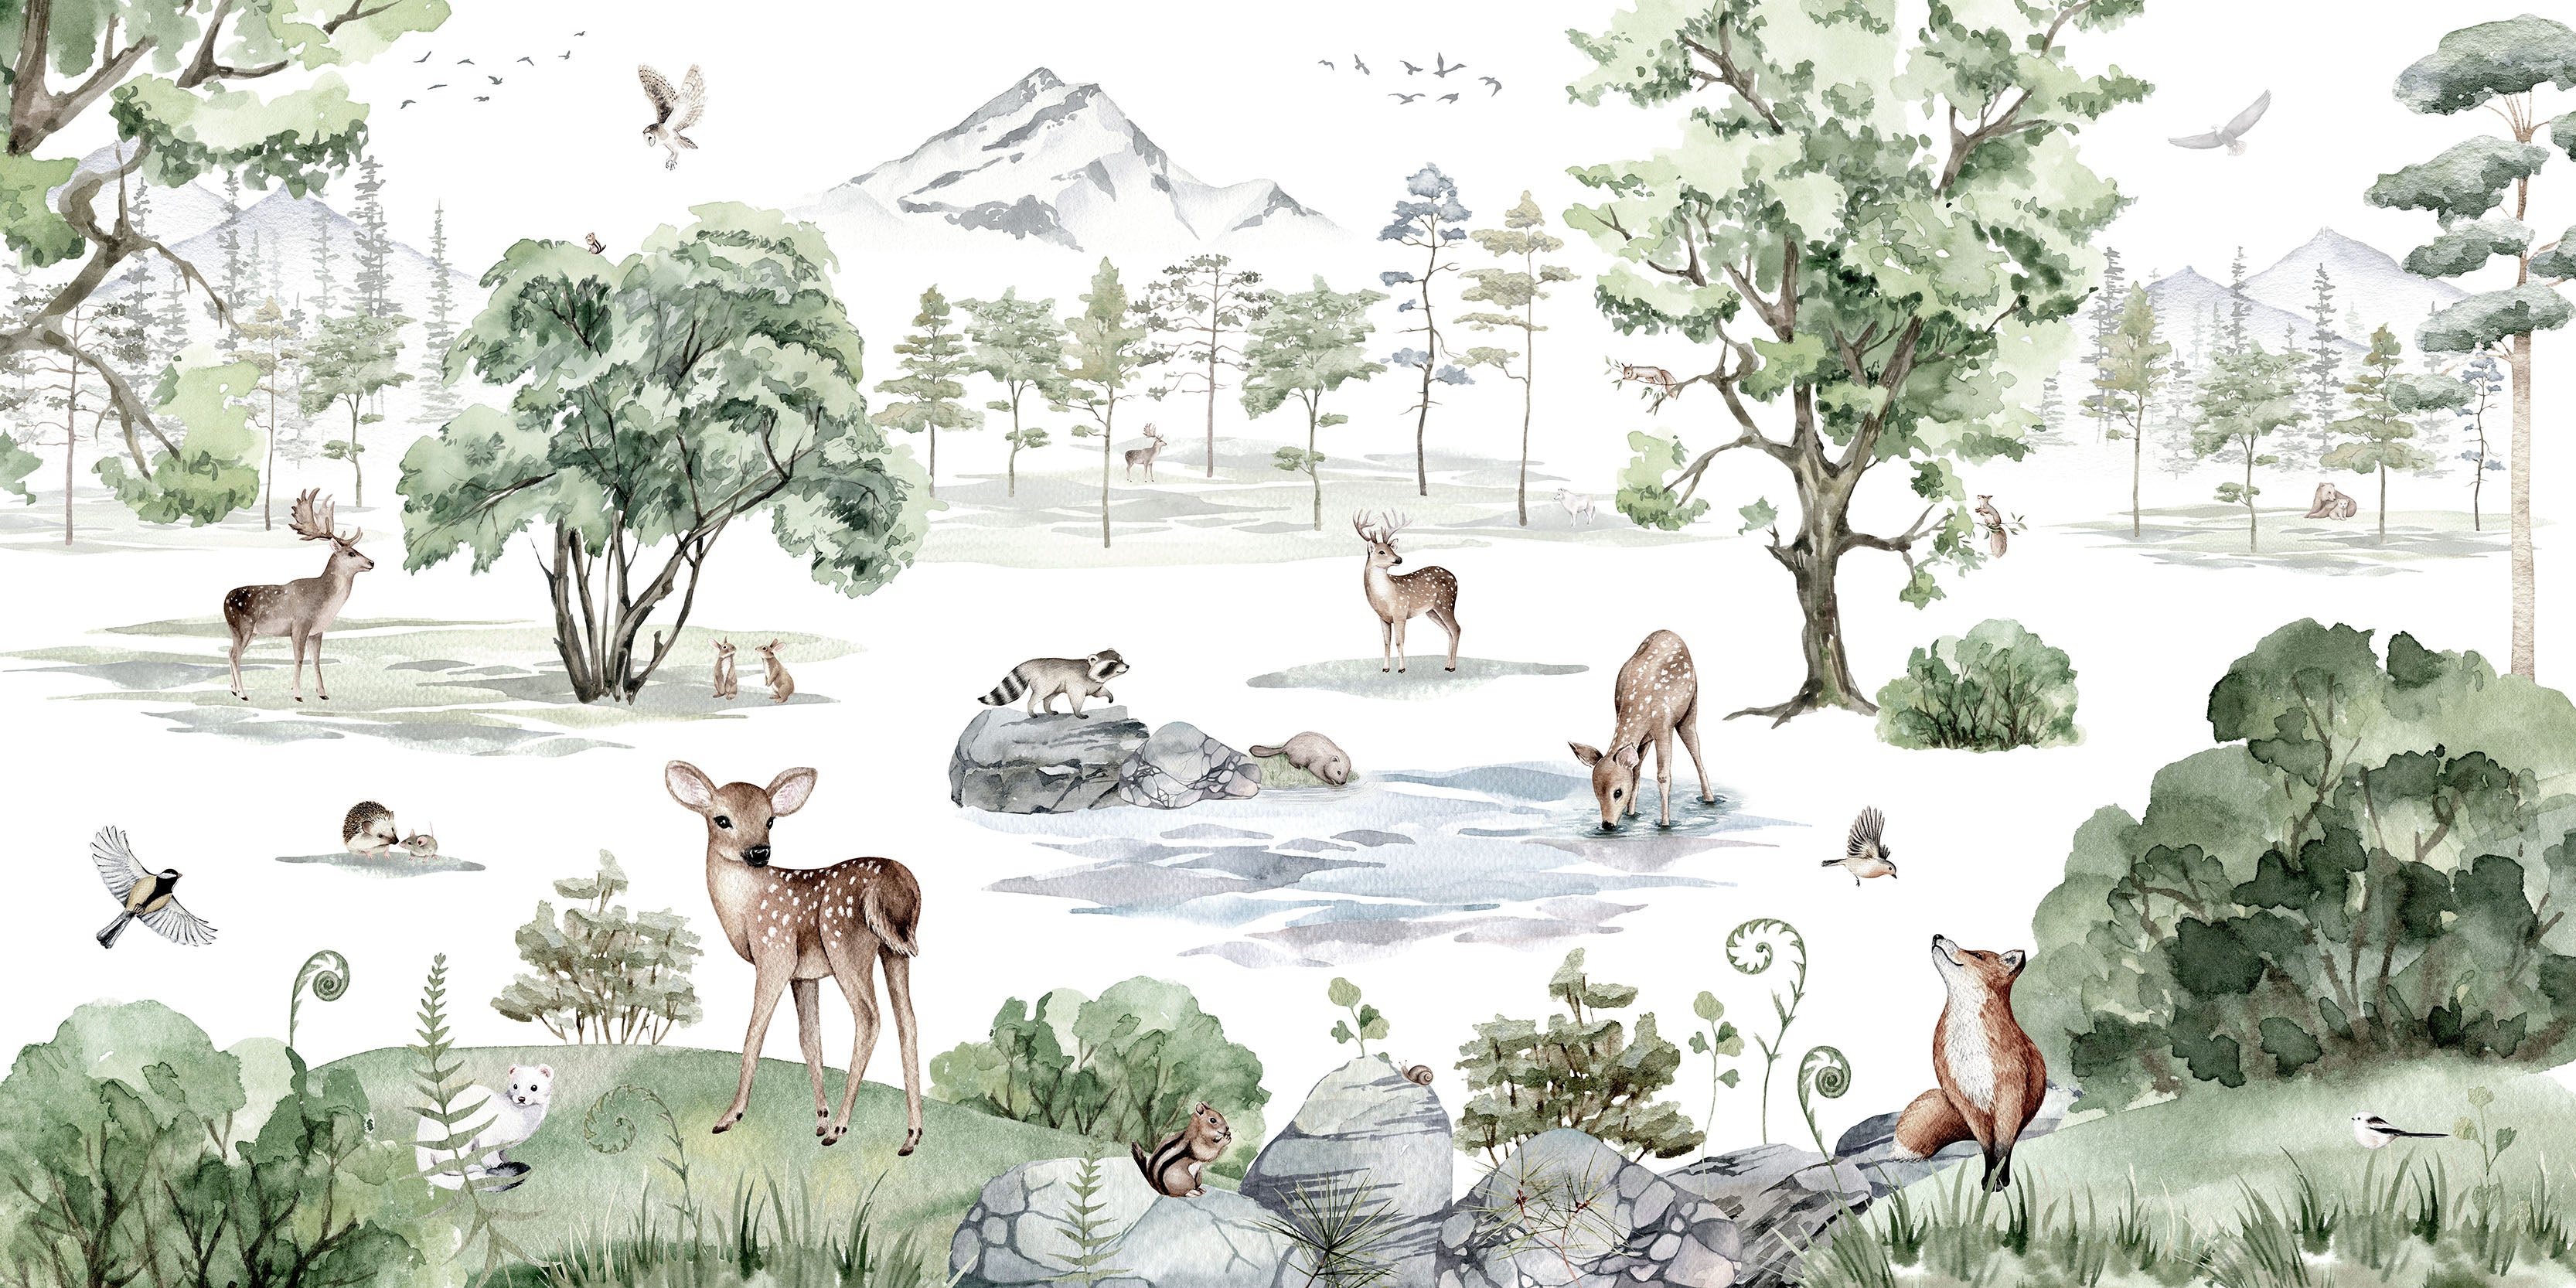 Deer Forest - Woodland Animals and Trees Wallpaper Mural